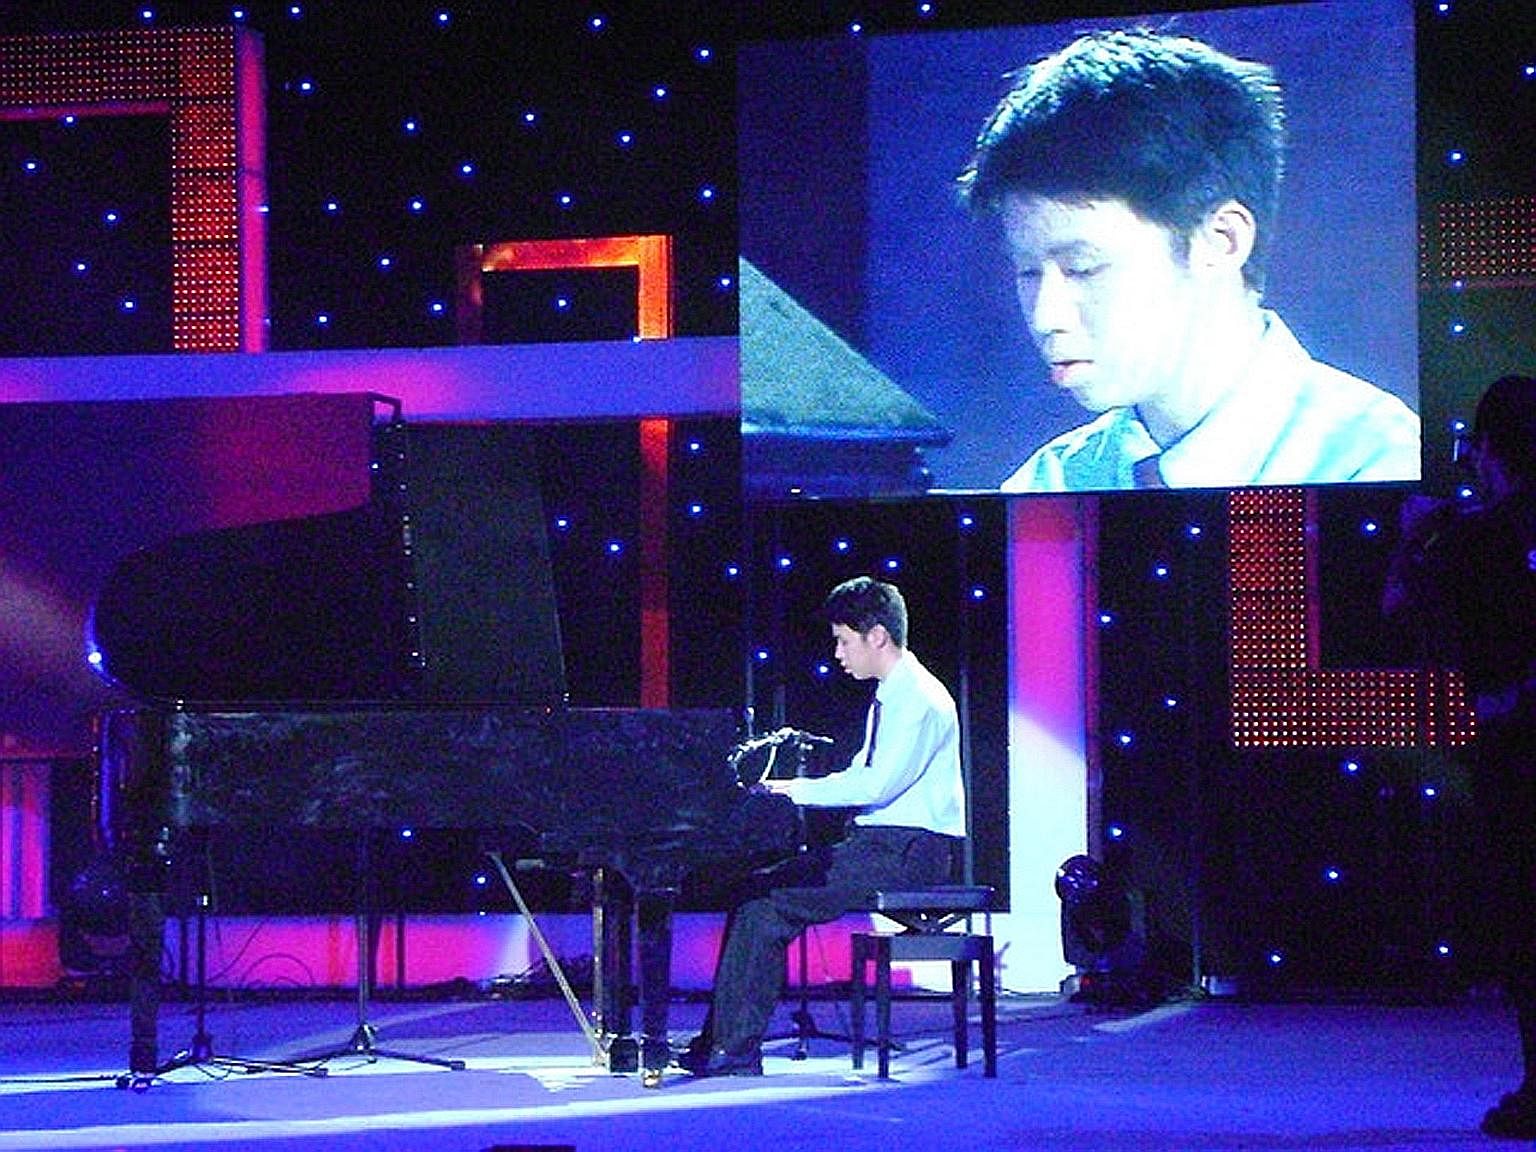 When Dr Tan was five, he attended a Yamaha keyboard class. He enjoyed it so much that his parents started him on private lessons. The Community Chest TrueHearts show is one of many charity events that Dr Tan has performed for. Dr Tan at the Yong Siew